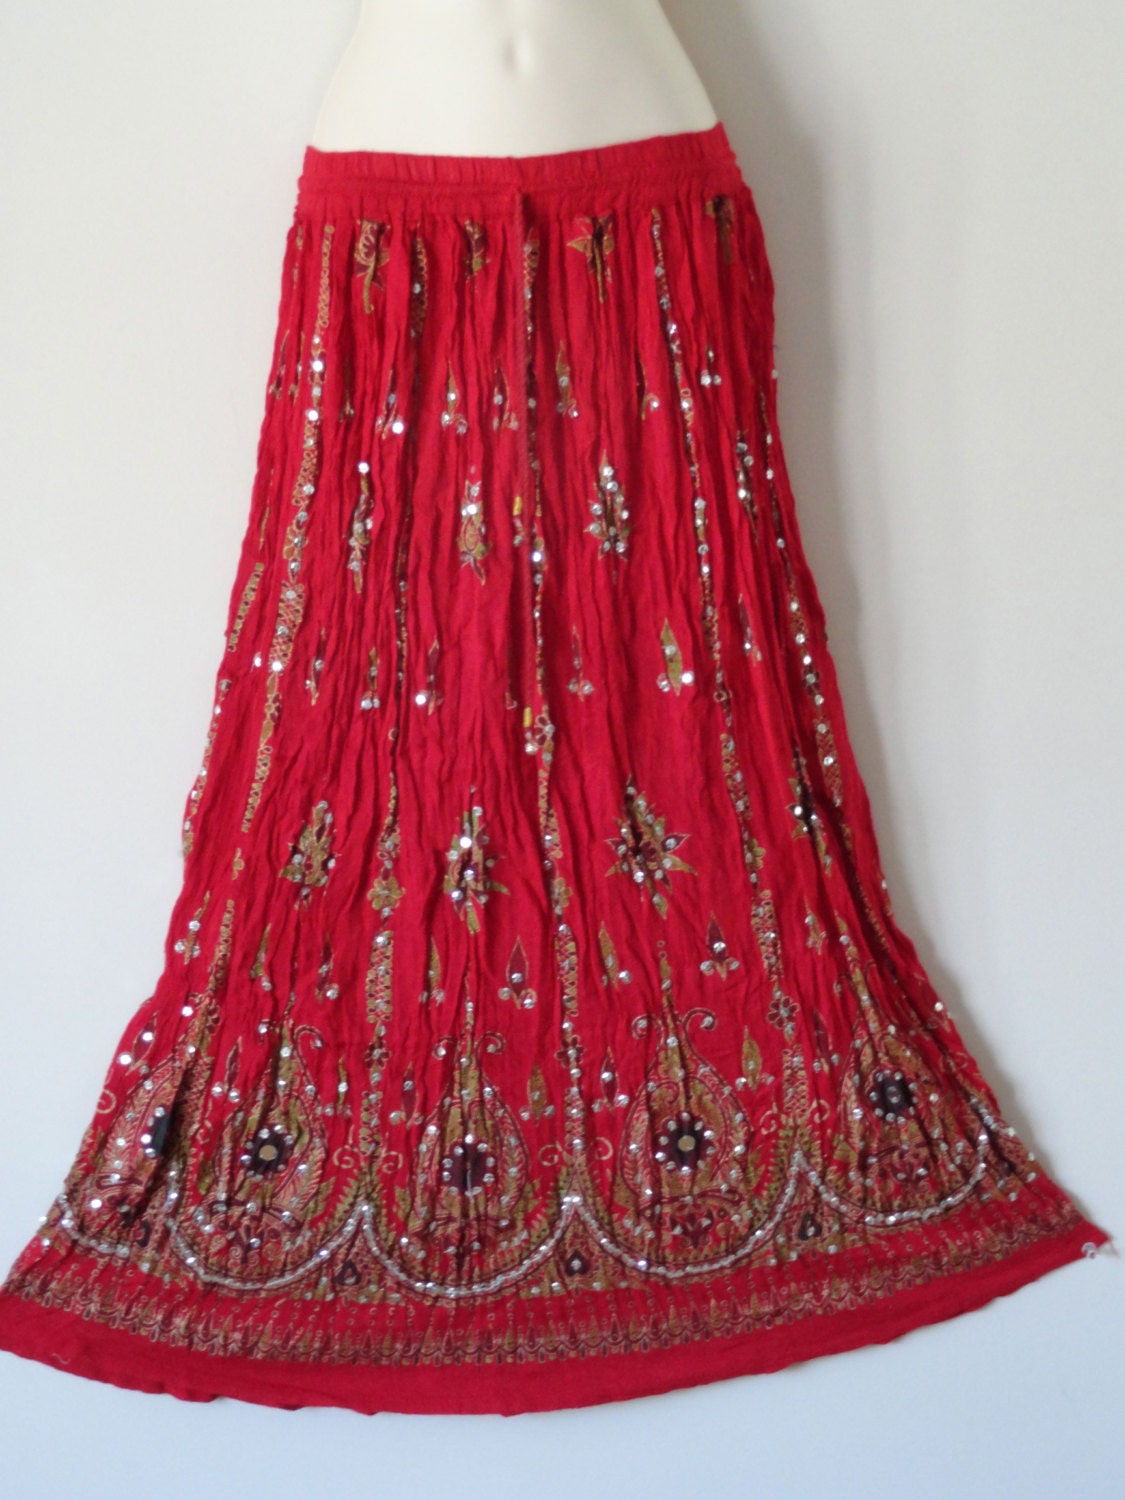 Indian long skirt. Maxi crushed cotton red mirror work skirt.